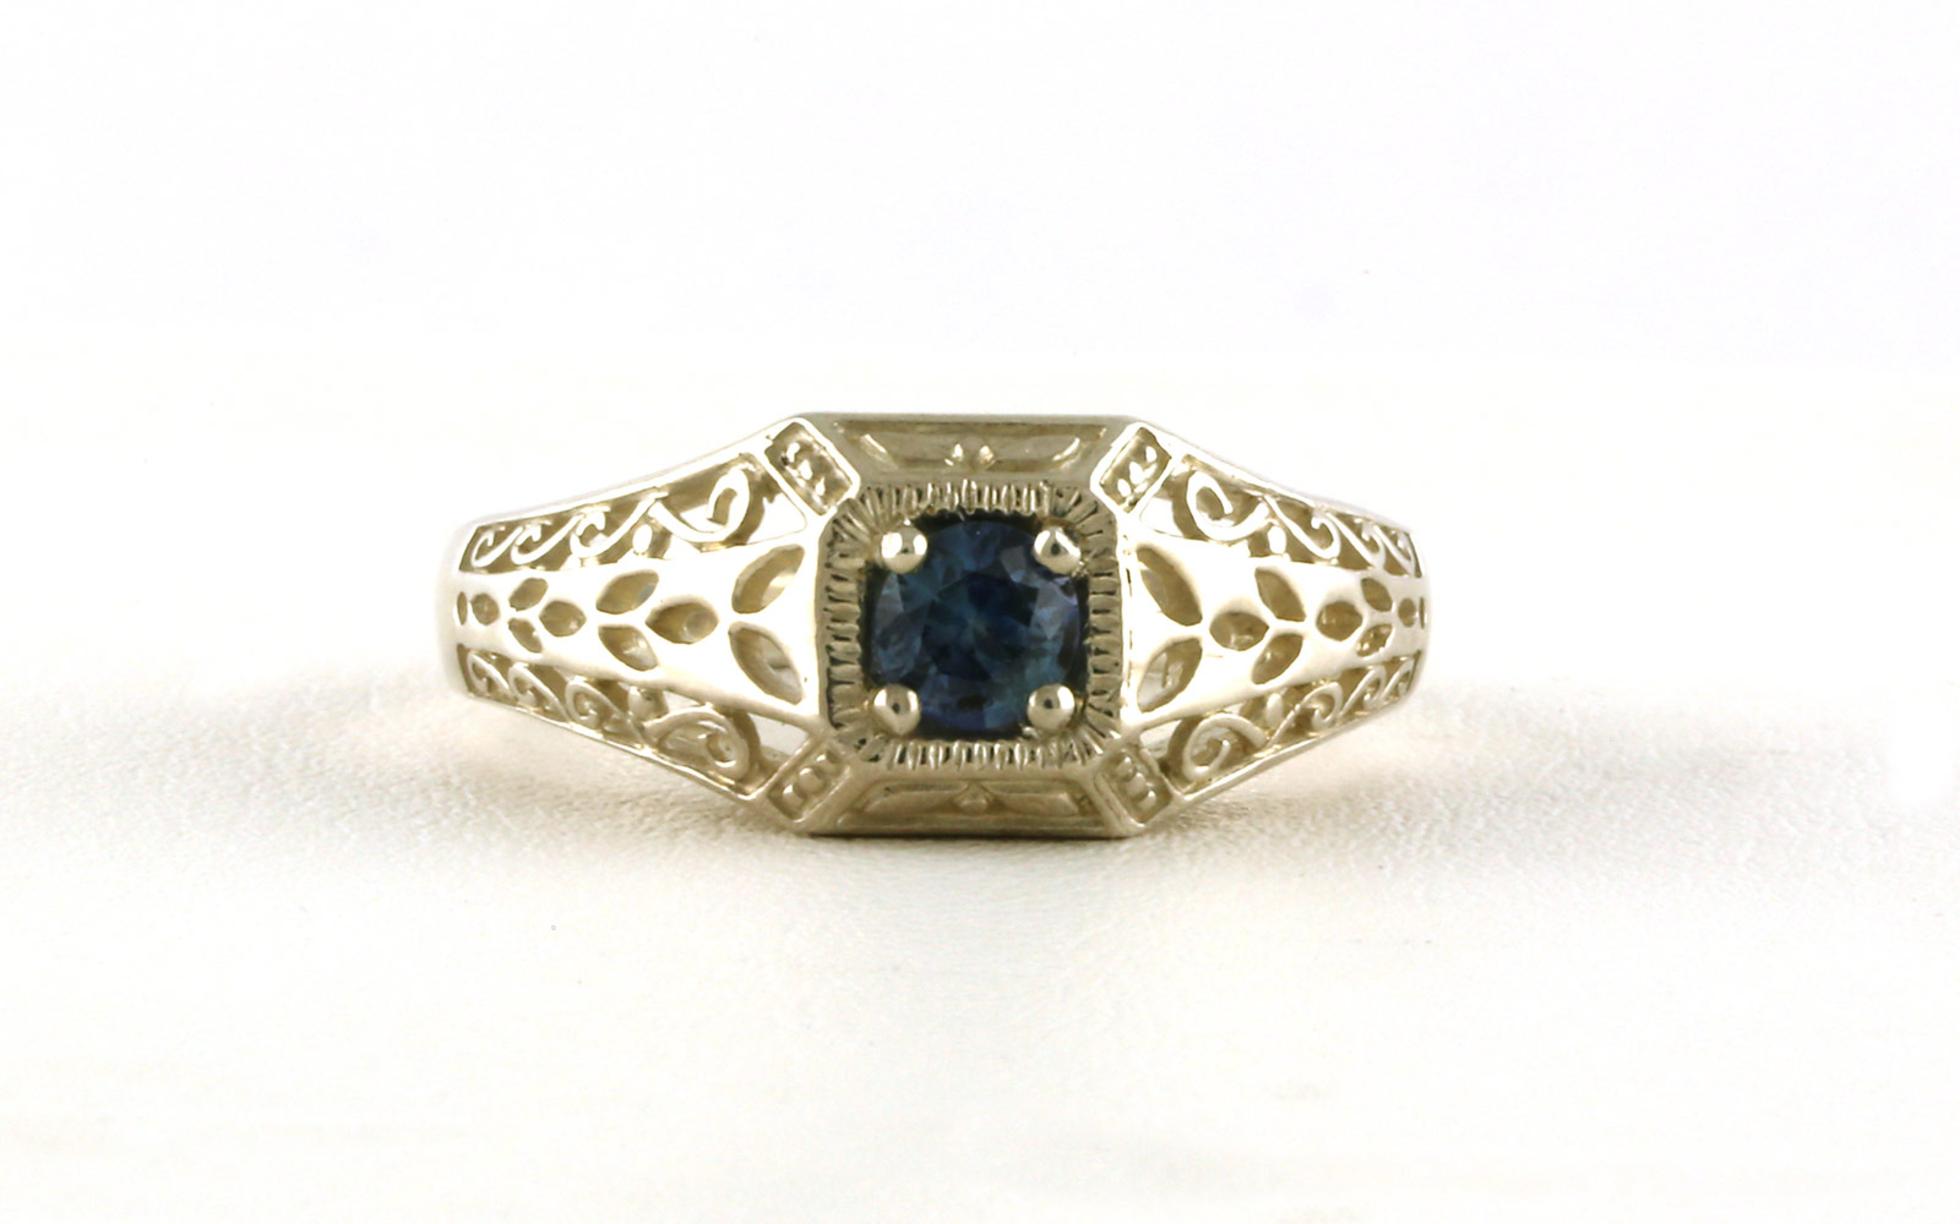 Vintage Filigree-style Montana Sapphire Ring in Sterling Silver (0.33cts TWT)